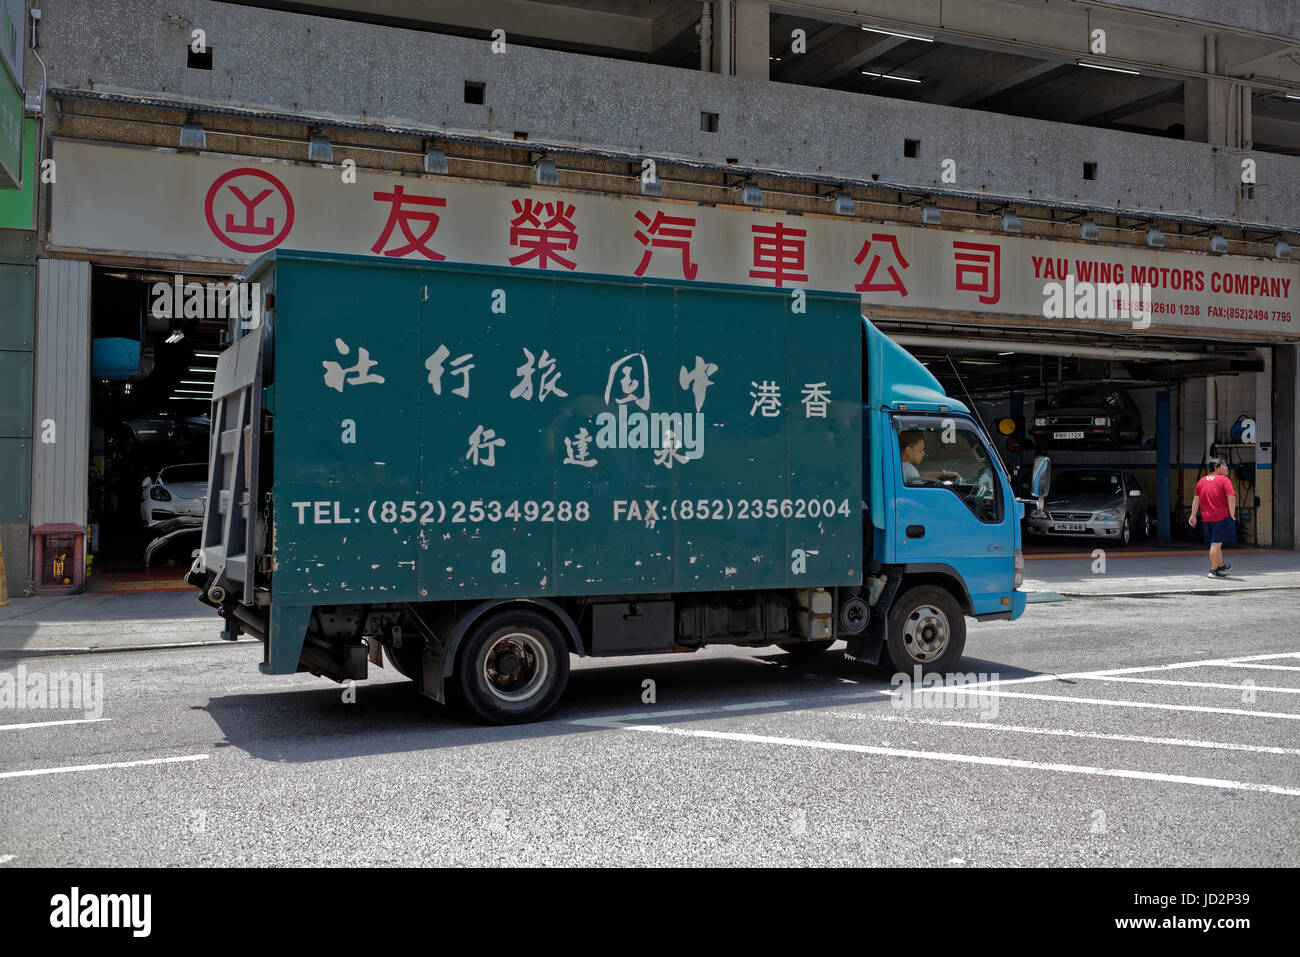 Cinese e Inglese scritto sul camion in Kwai Hing, Kowloon, Hong Kong Foto Stock